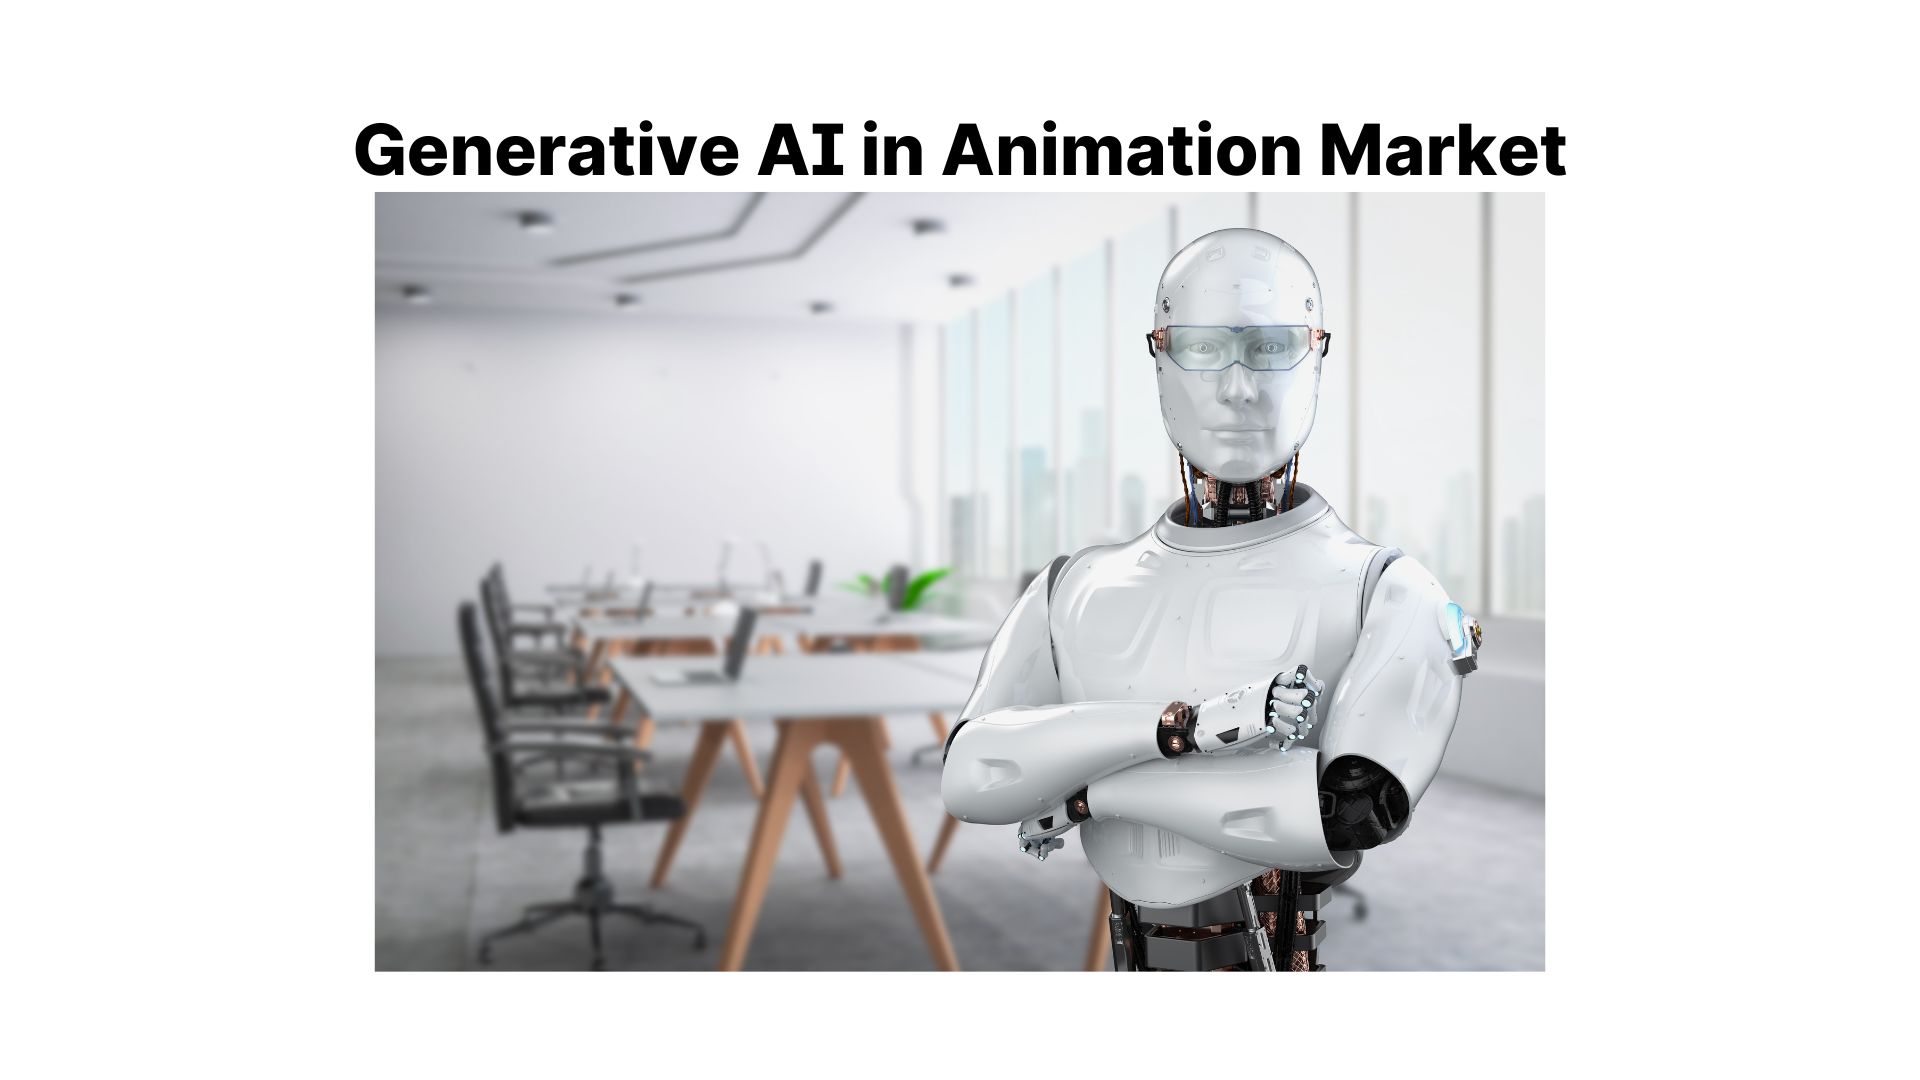 Generative AI in Animation Market is expected to reach USD 17.7 billion in 2032